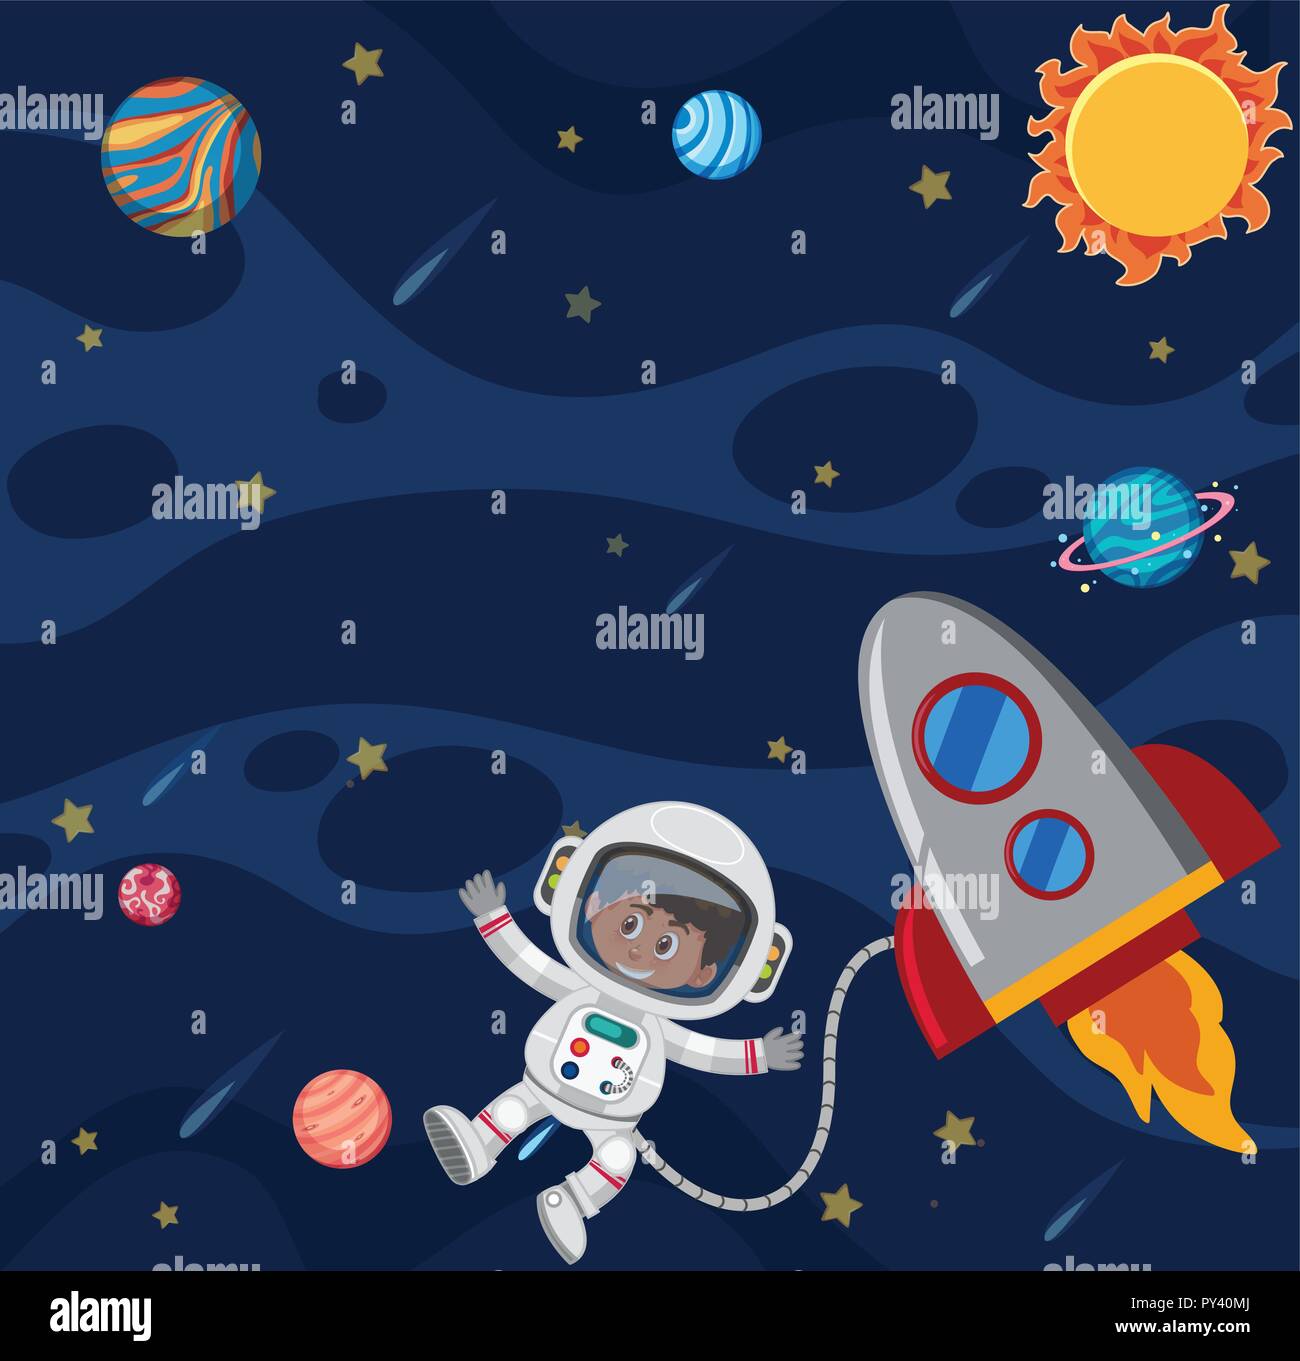 Astronaut  in the space illustration Stock Vector